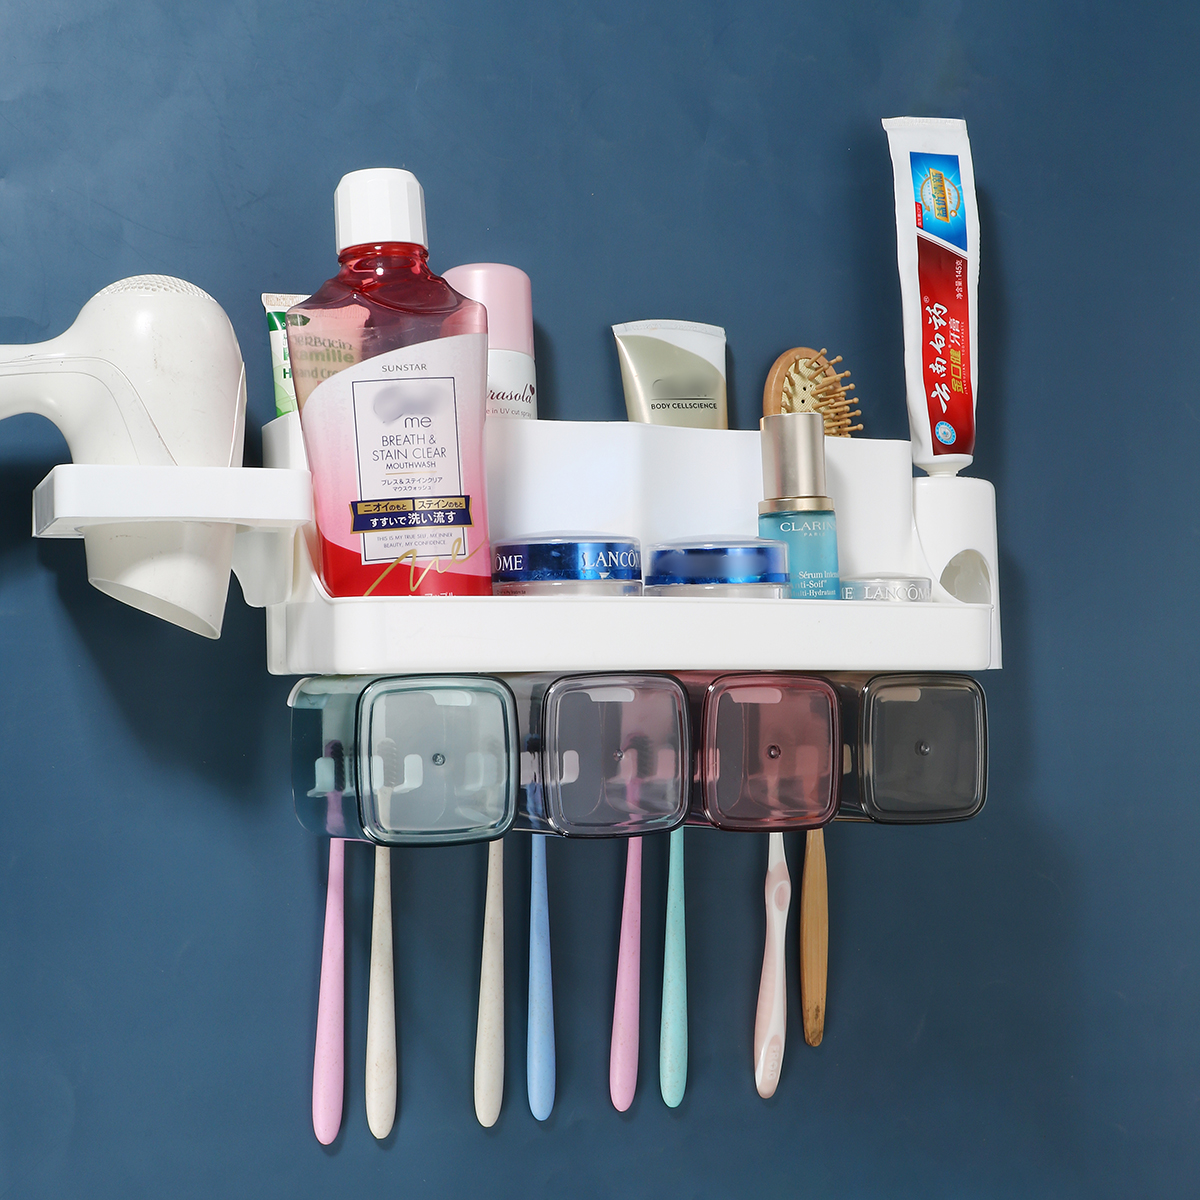 Toothpaste-Holders-Toothbrush-Rack-Wall-Mounted-Space-Saving-Toothbrush-Toothpaste-Squeezer-Kit-With-1801949-12